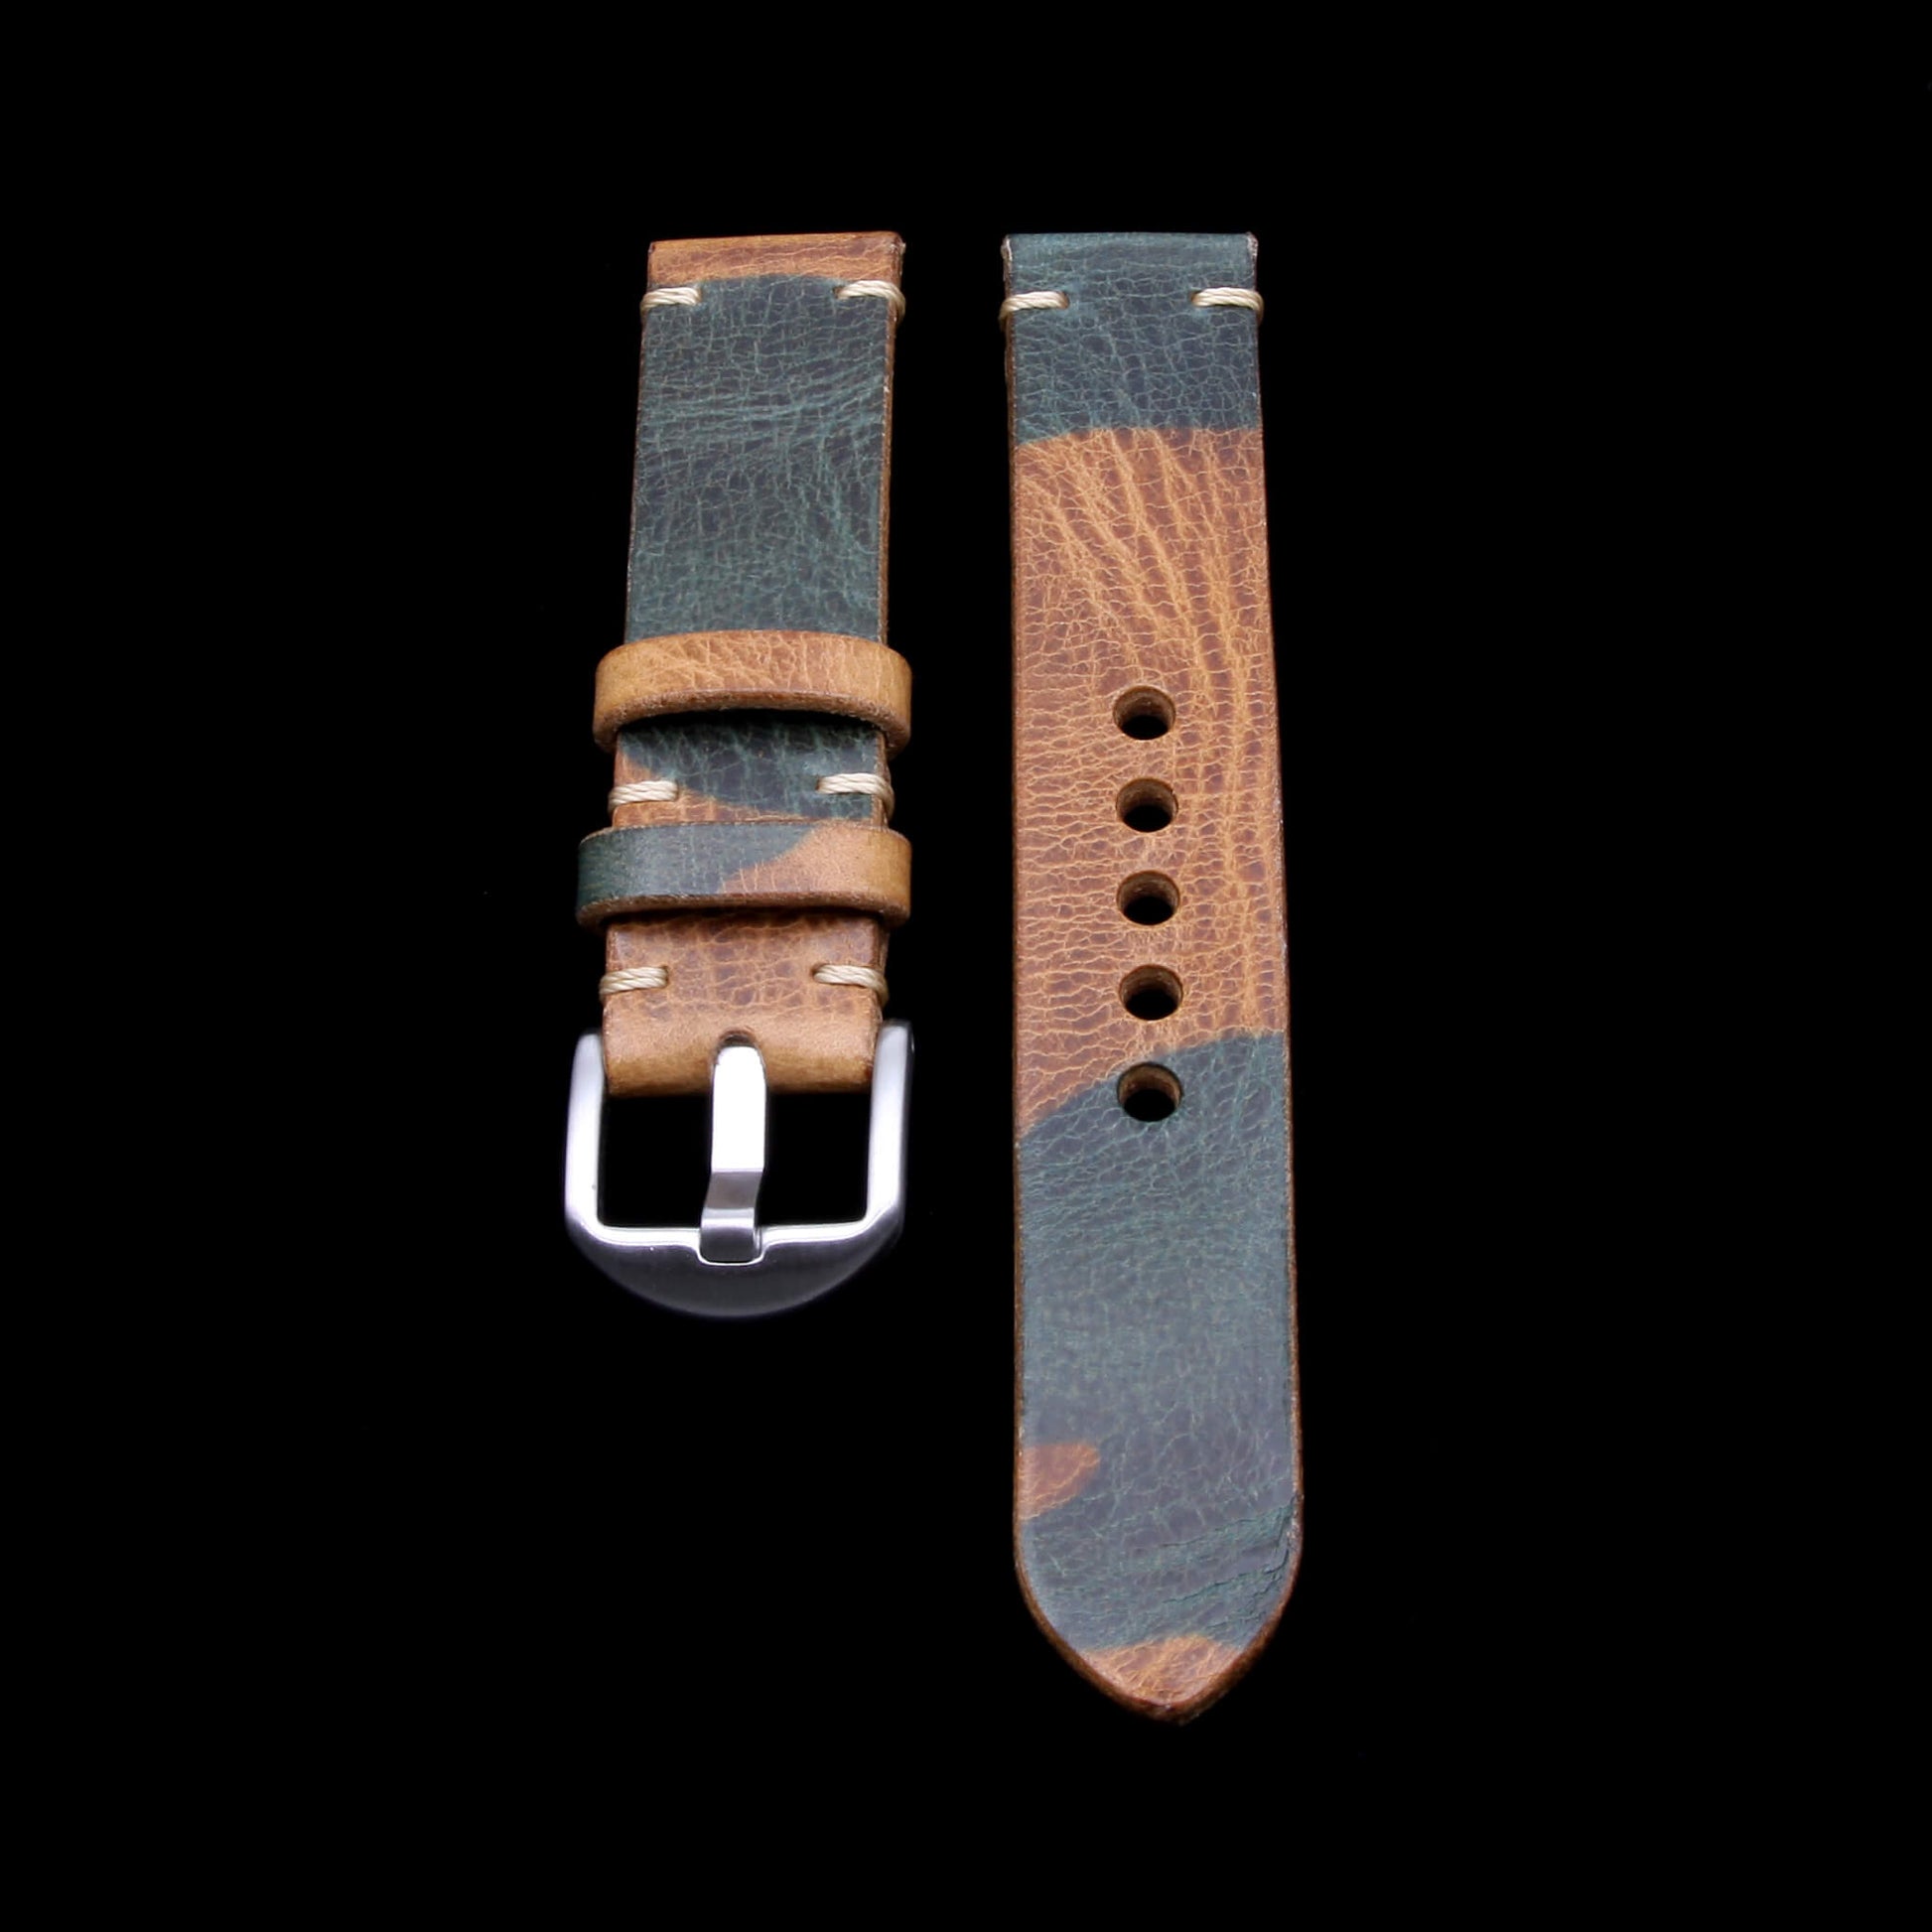 Gorgeous camo, premium comfort: Cozy Handmade's Military 101 Italian leather Apple Watch strap blends style and nature.